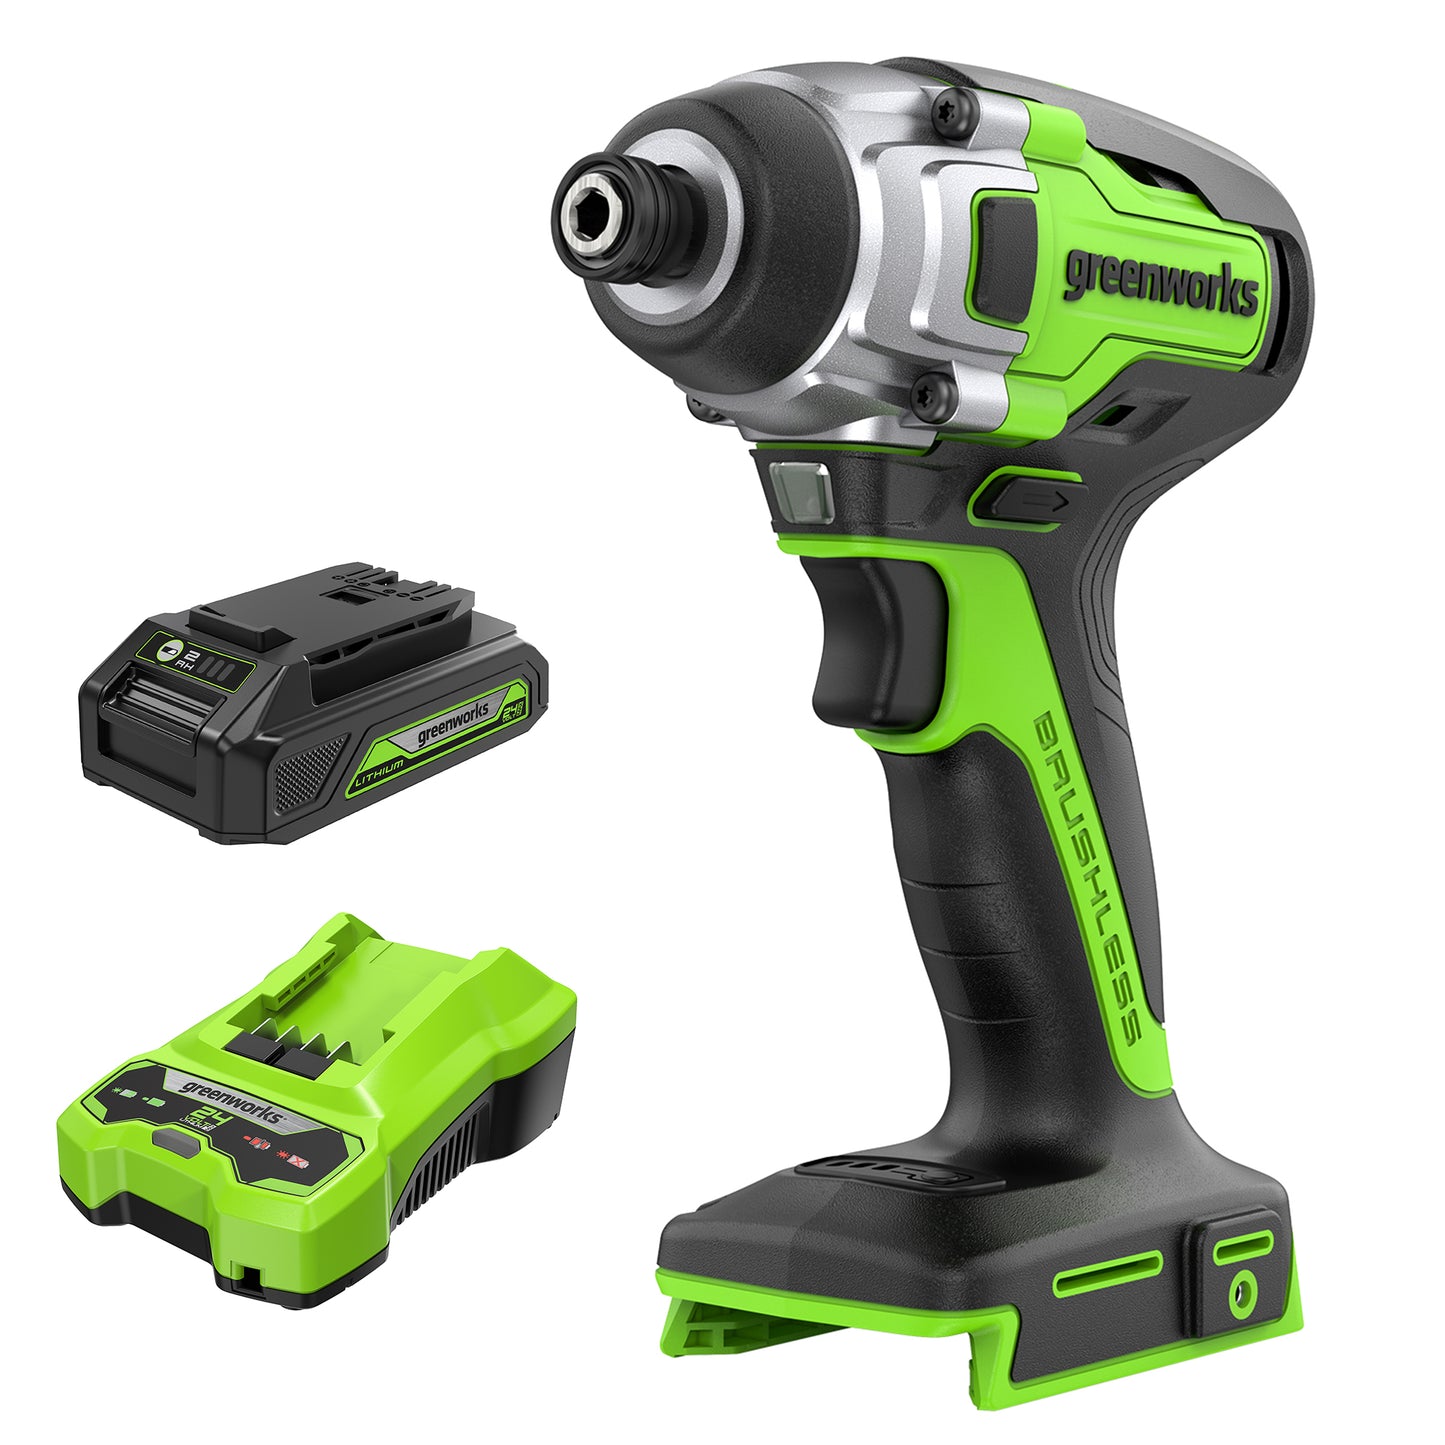 24V 1/4" 2650 in/lbs Brushless Impact Driver w/ 2.0Ah USB Battery & Charger